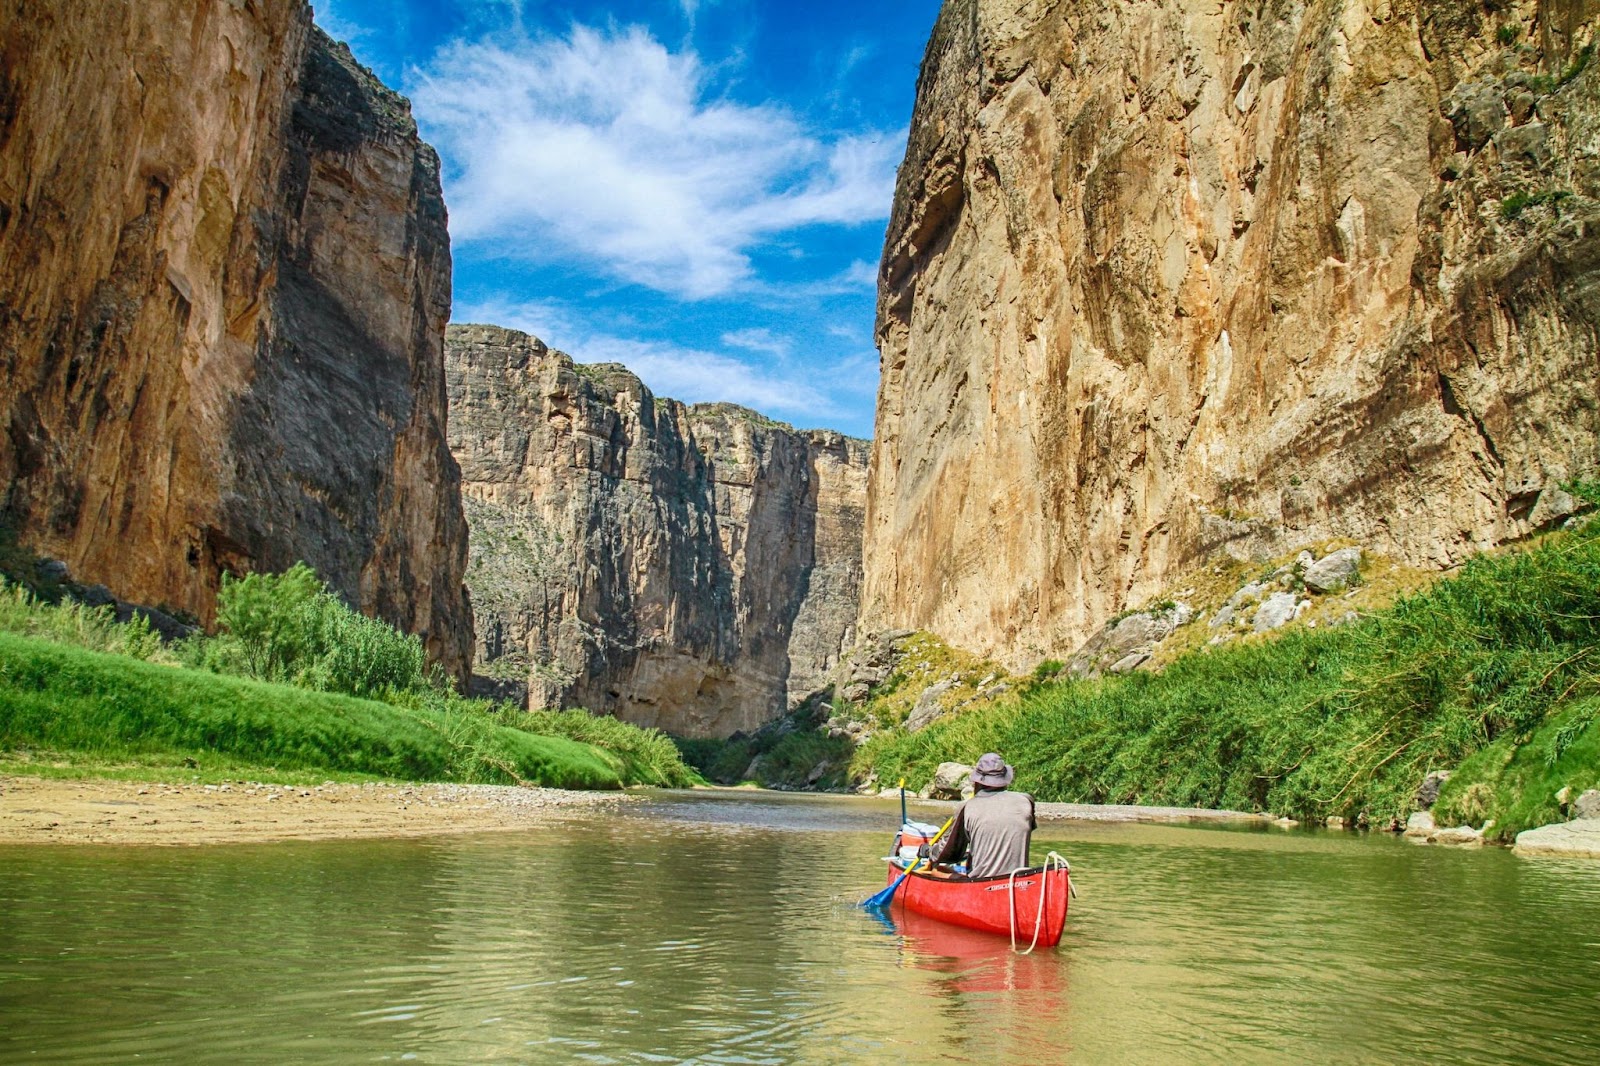 A person in a red canoe on a river, surrounded by large cliffs on both sides.